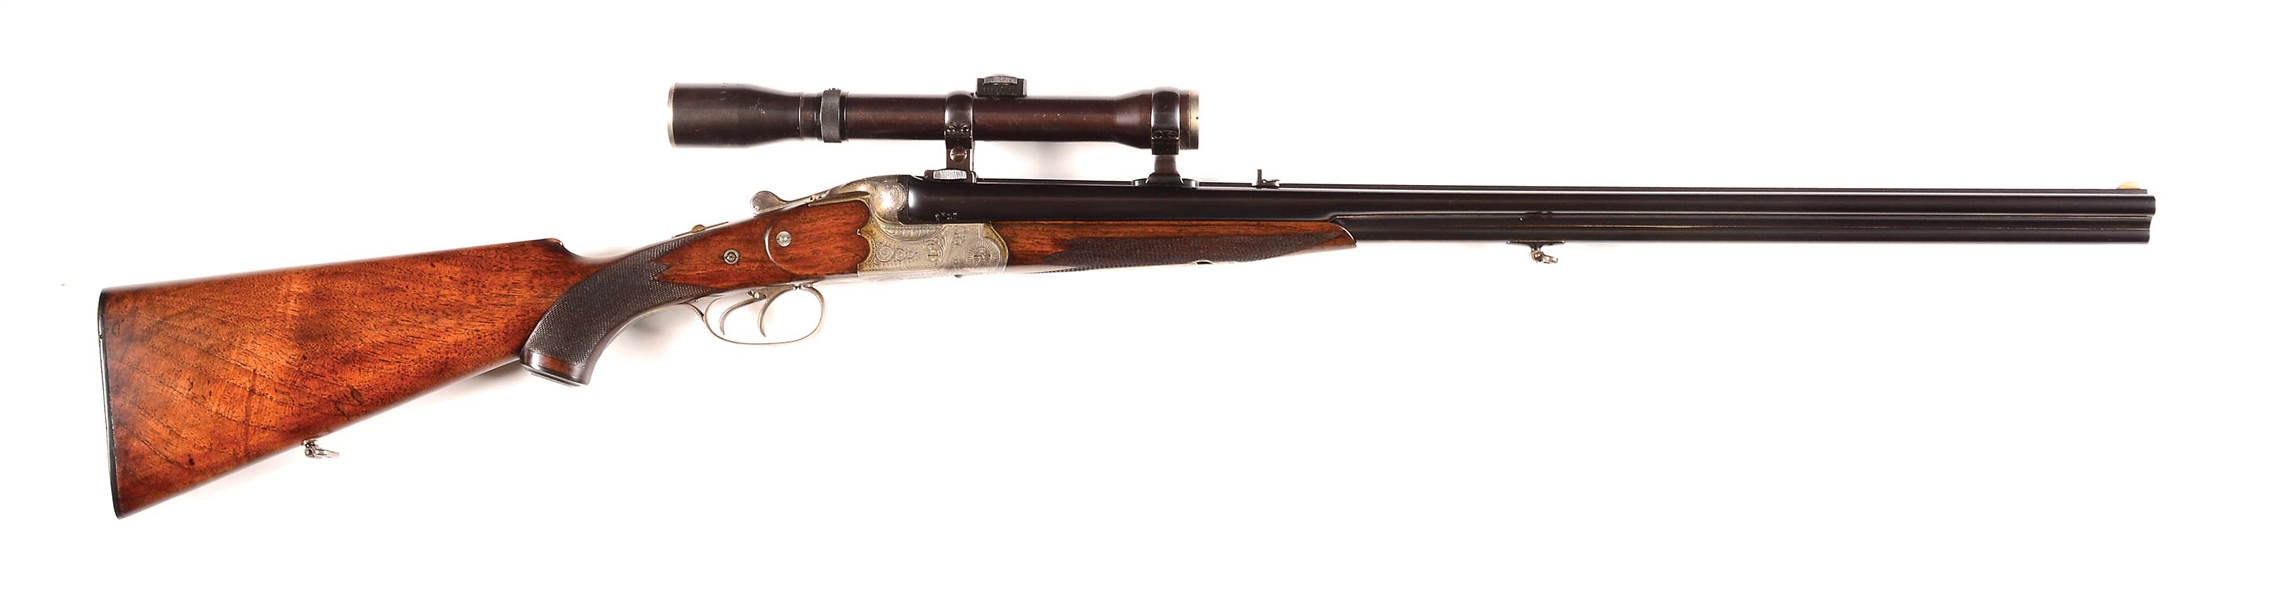 (C) RARE OFFSET DOUBLE RIFLE GERMAN DRILLING ATTRIBUTED TO KRIEGHOFF.